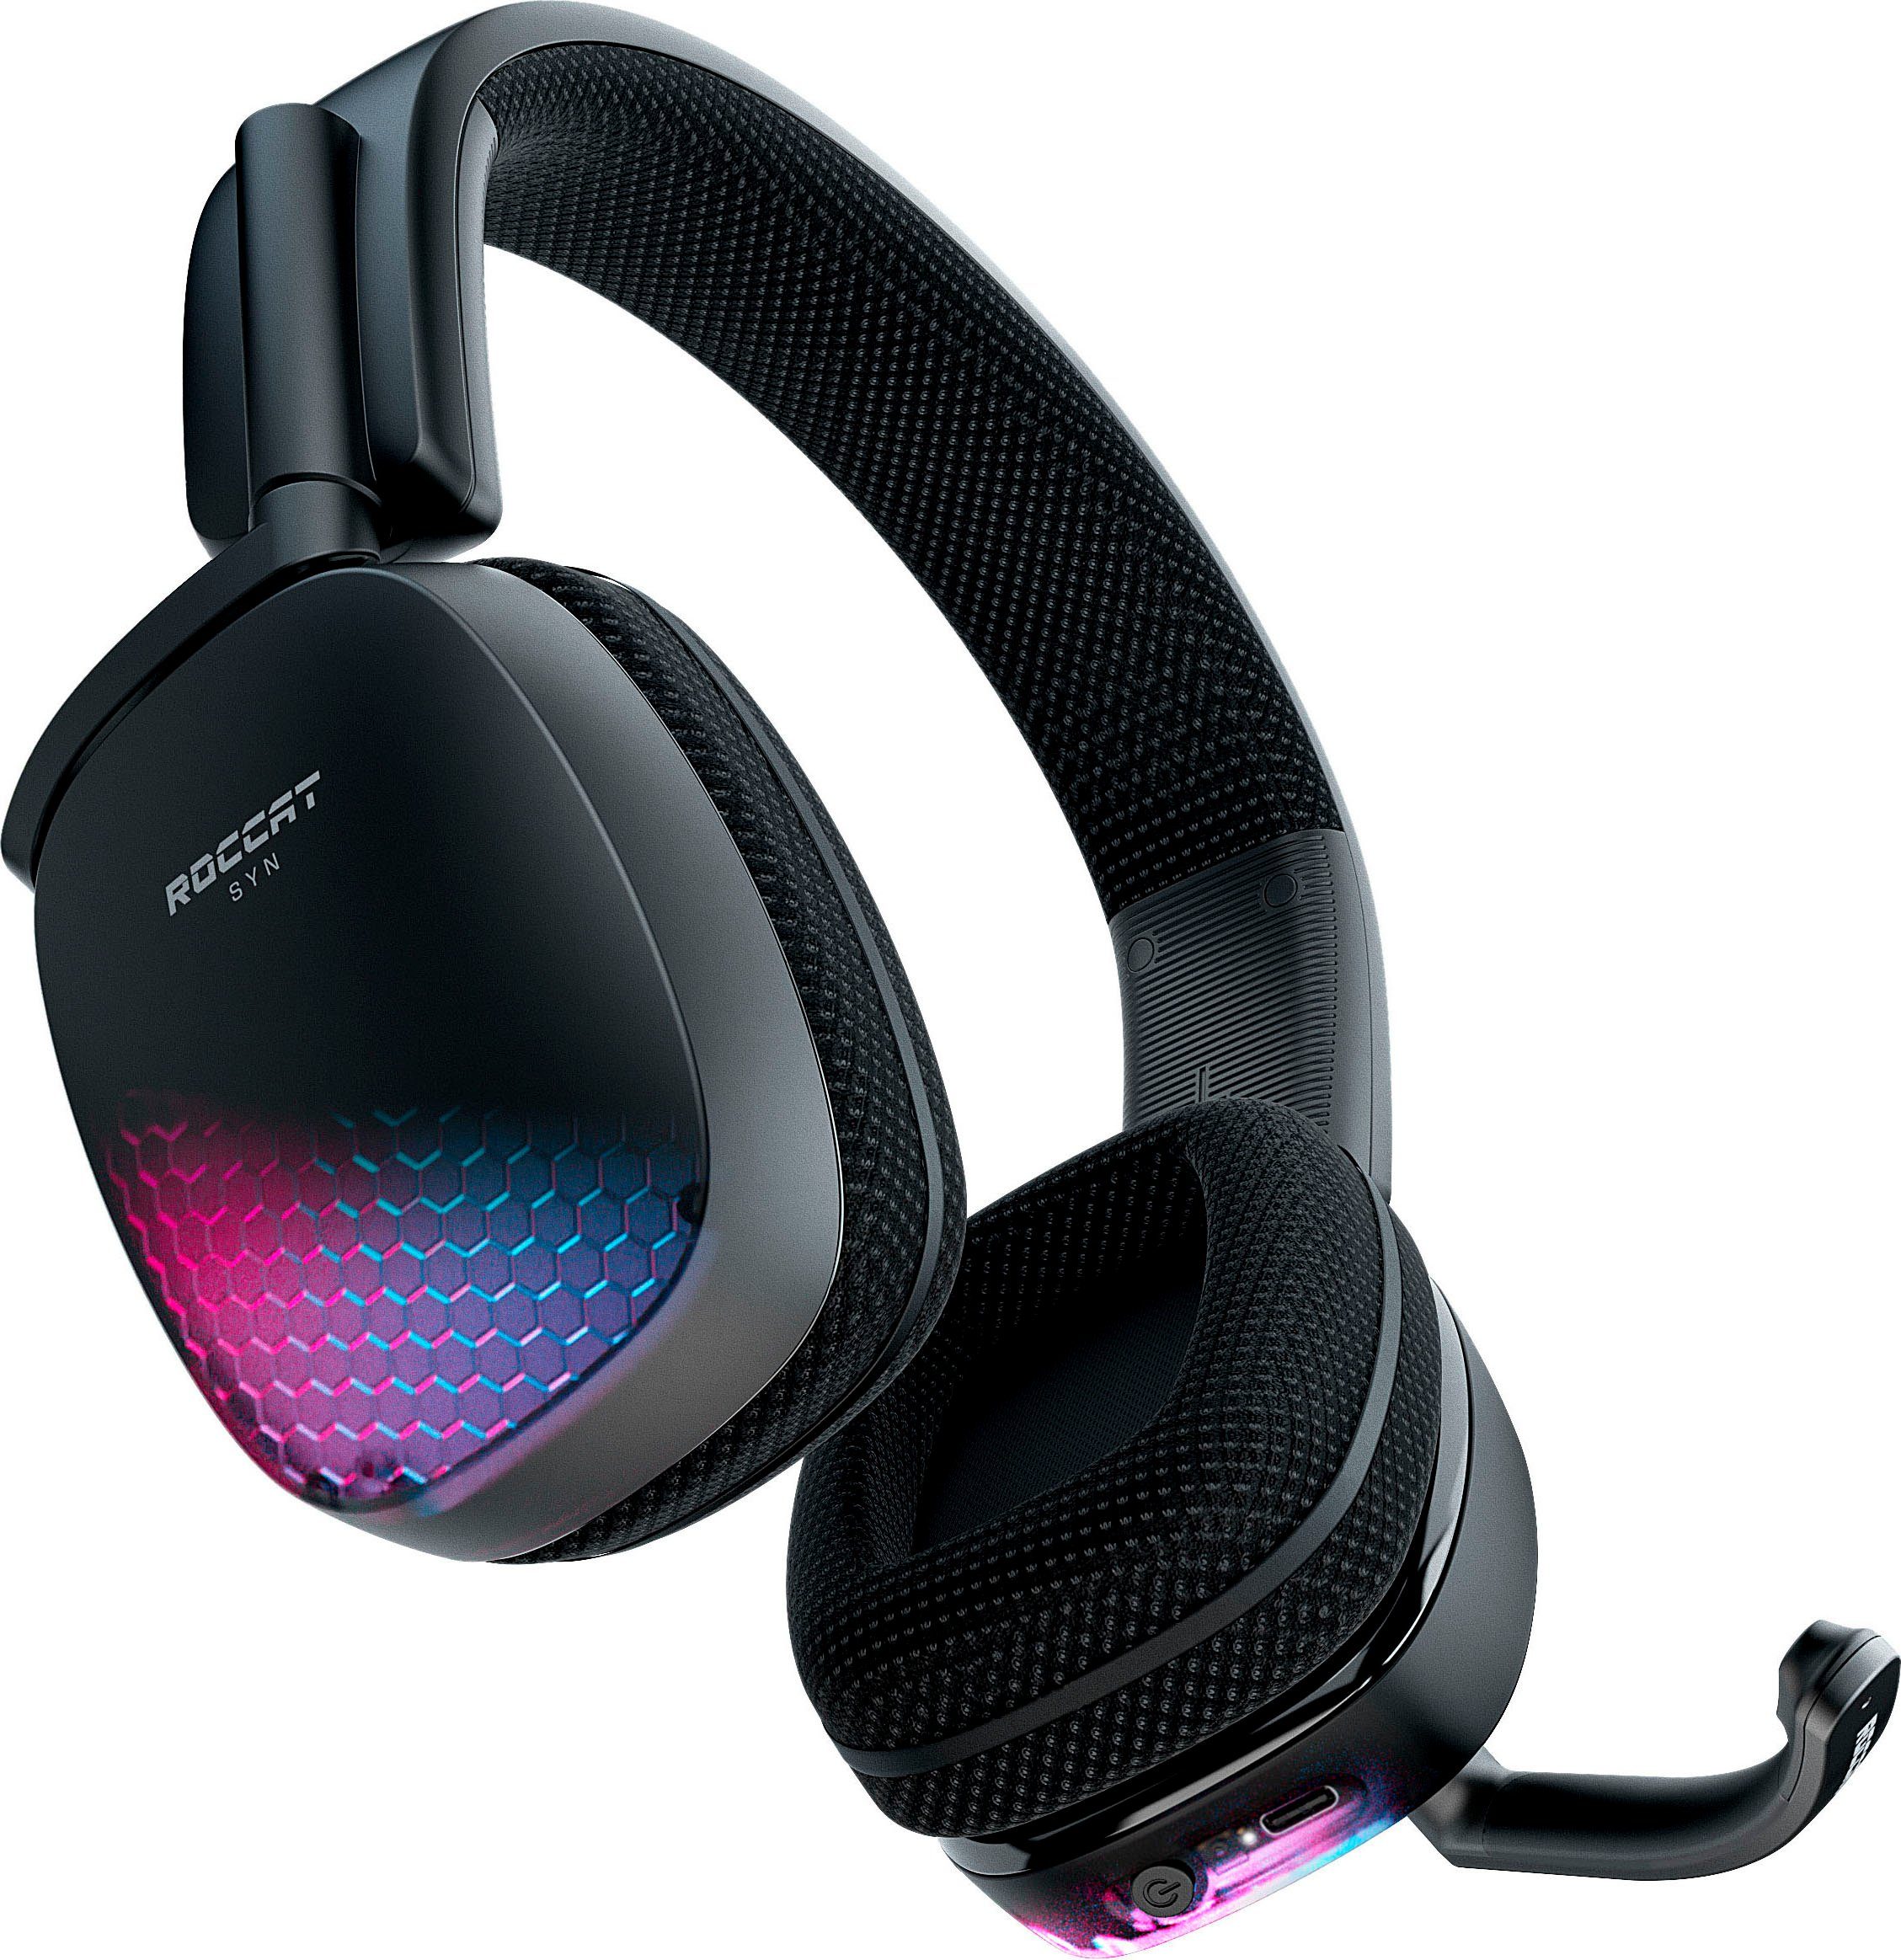 ROCCAT SYN (Noise-Cancelling, Air Gaming-Headset (WiFi) WLAN Pro